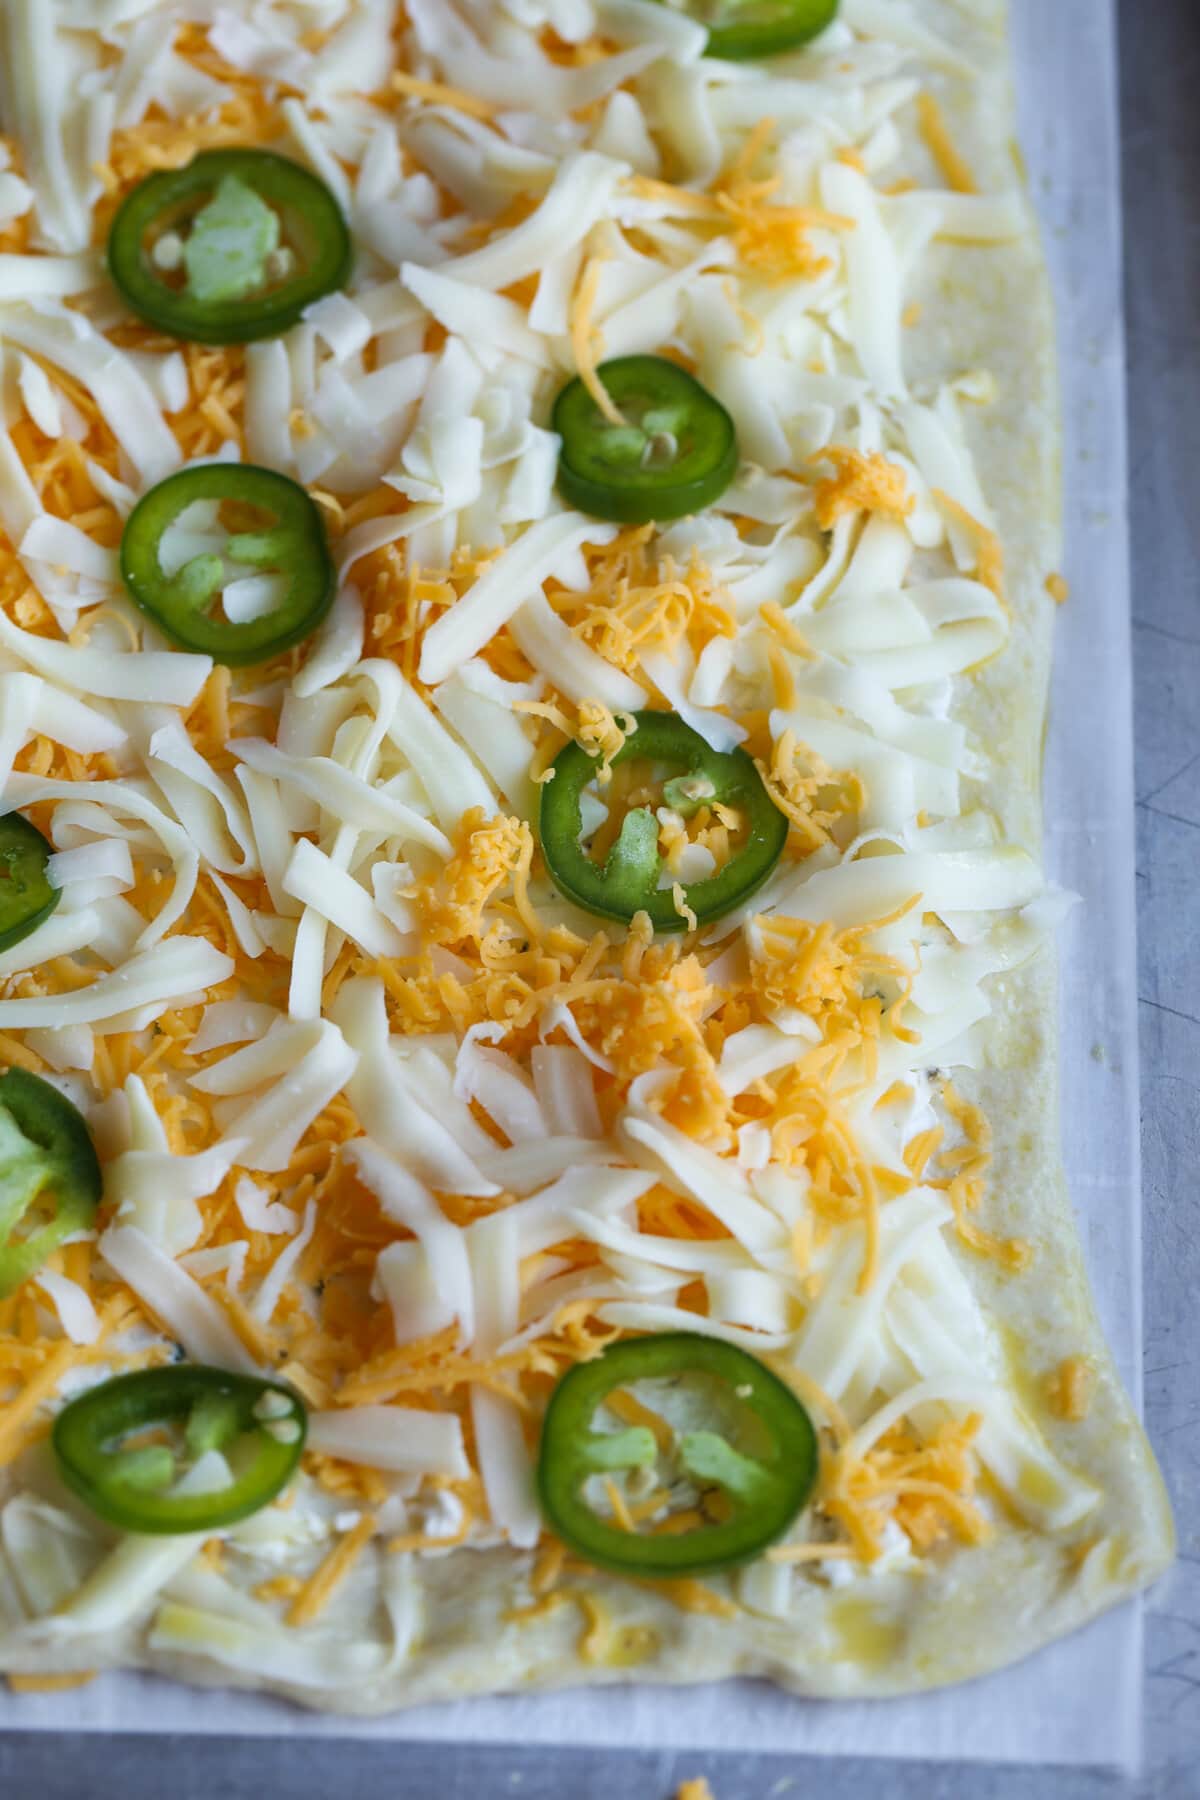 Uncooked Jalapeno popper pizza